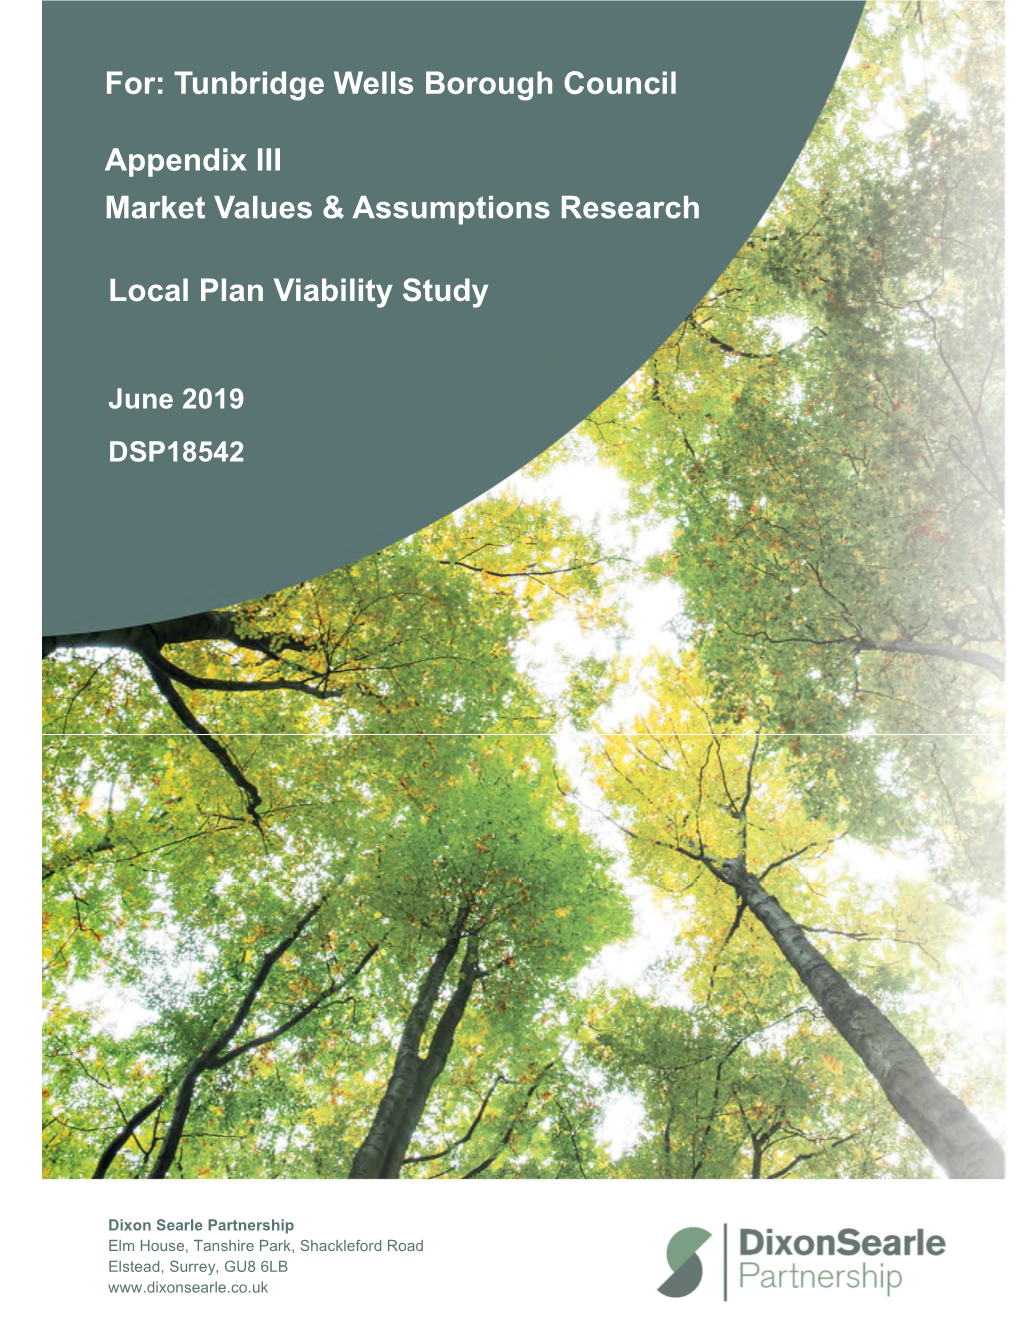 Market Values and Assumptions Research